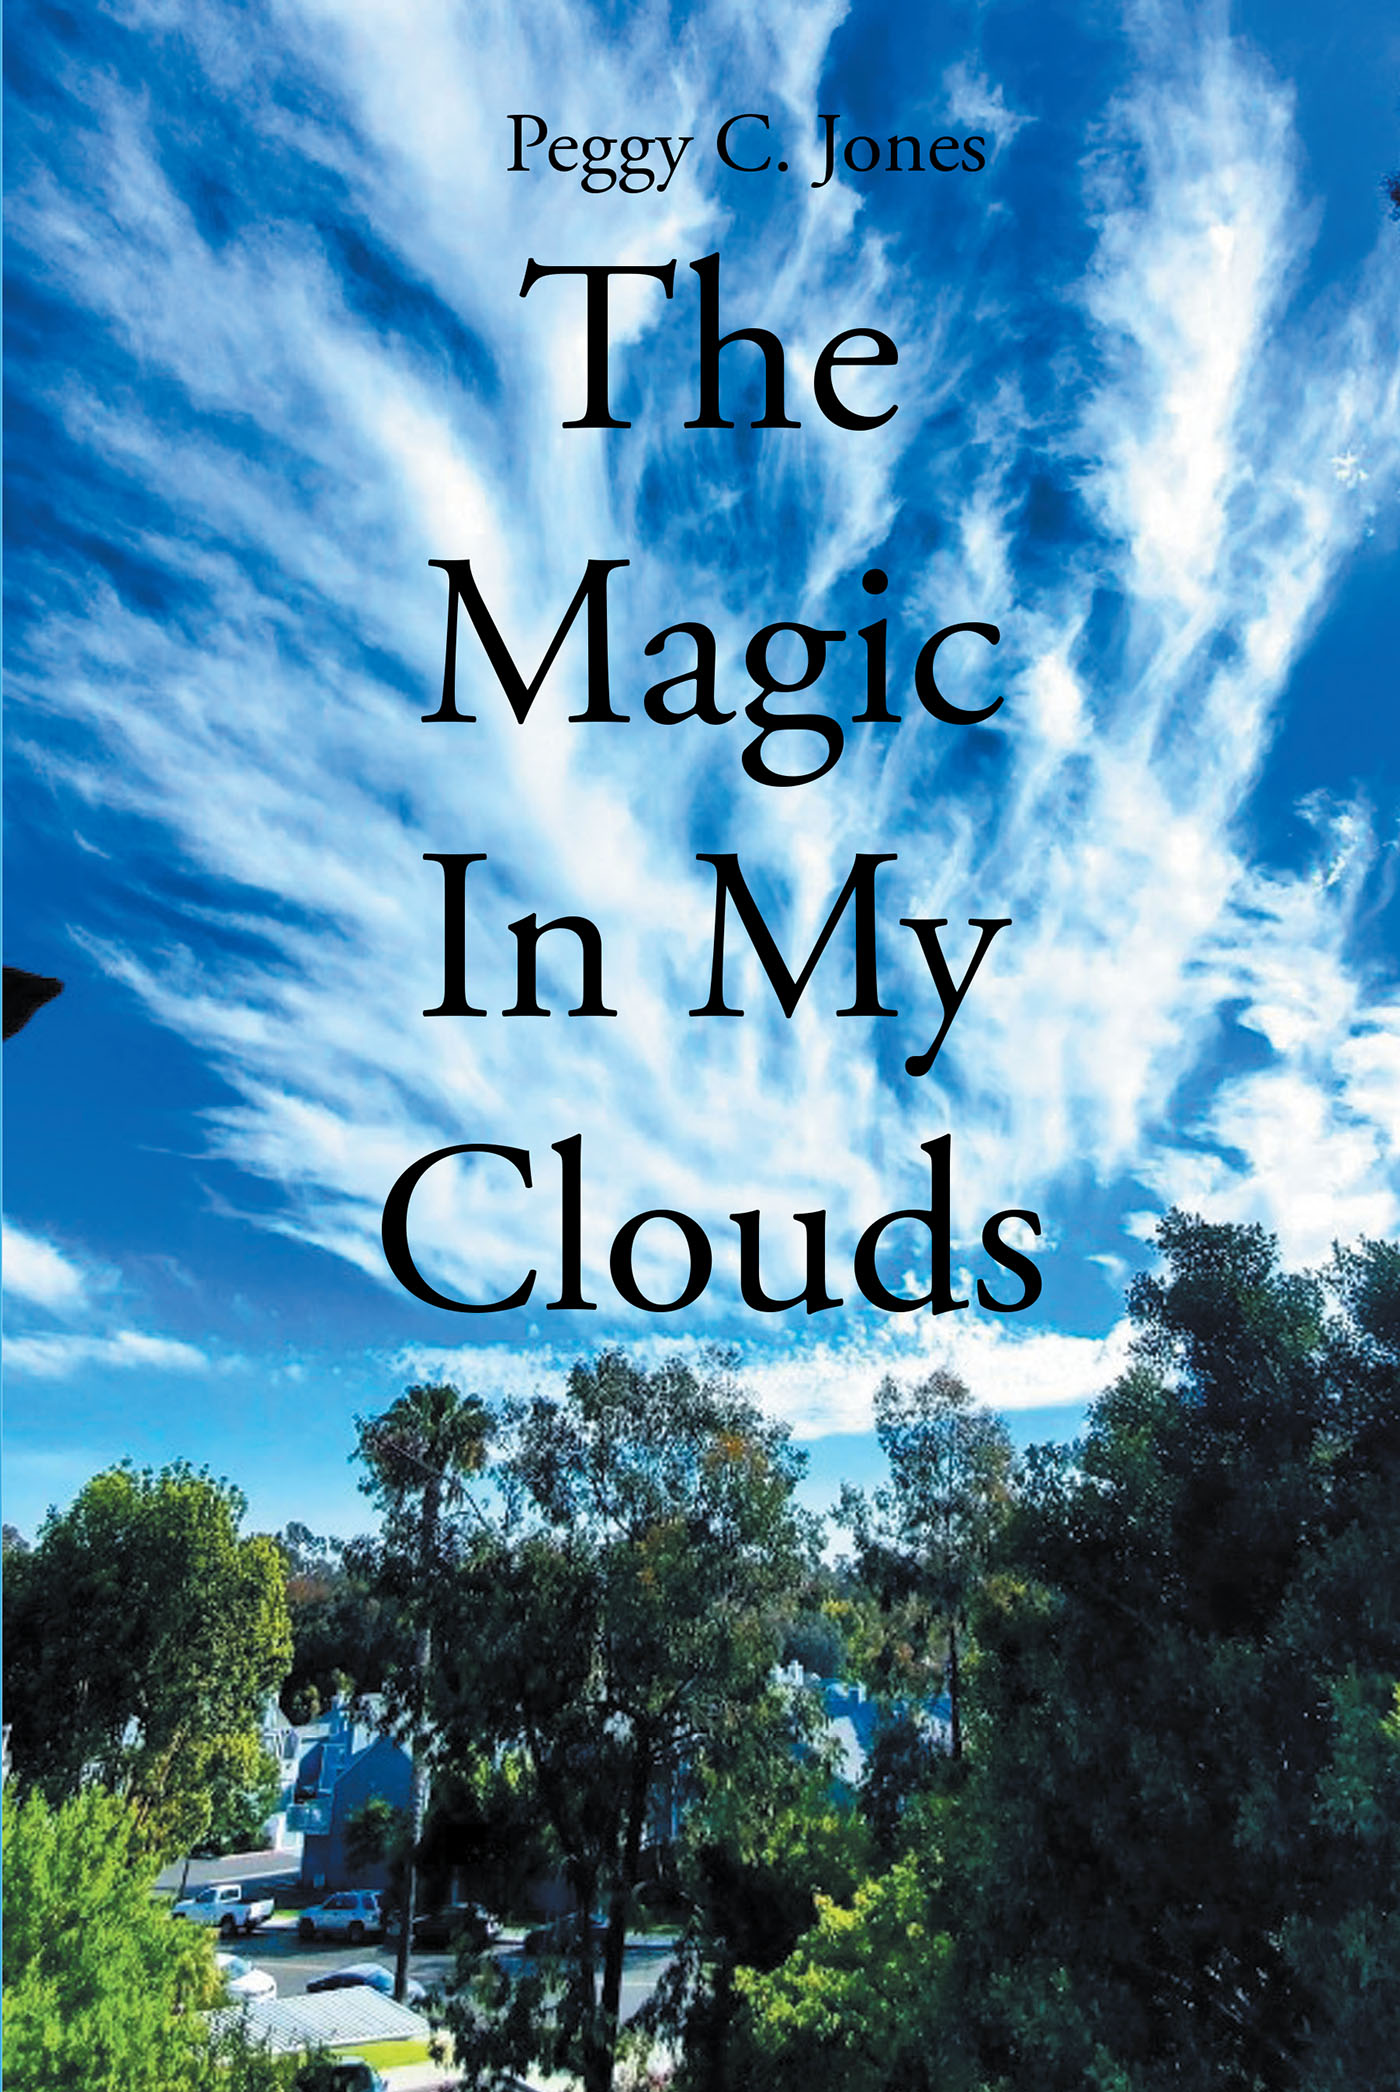 Author Peggy C. Jones’s New Book, "The Magic in My Clouds," is a Collection of Photographs Revealing the Visions the Author Has Seen While Staring Up at the Clouds